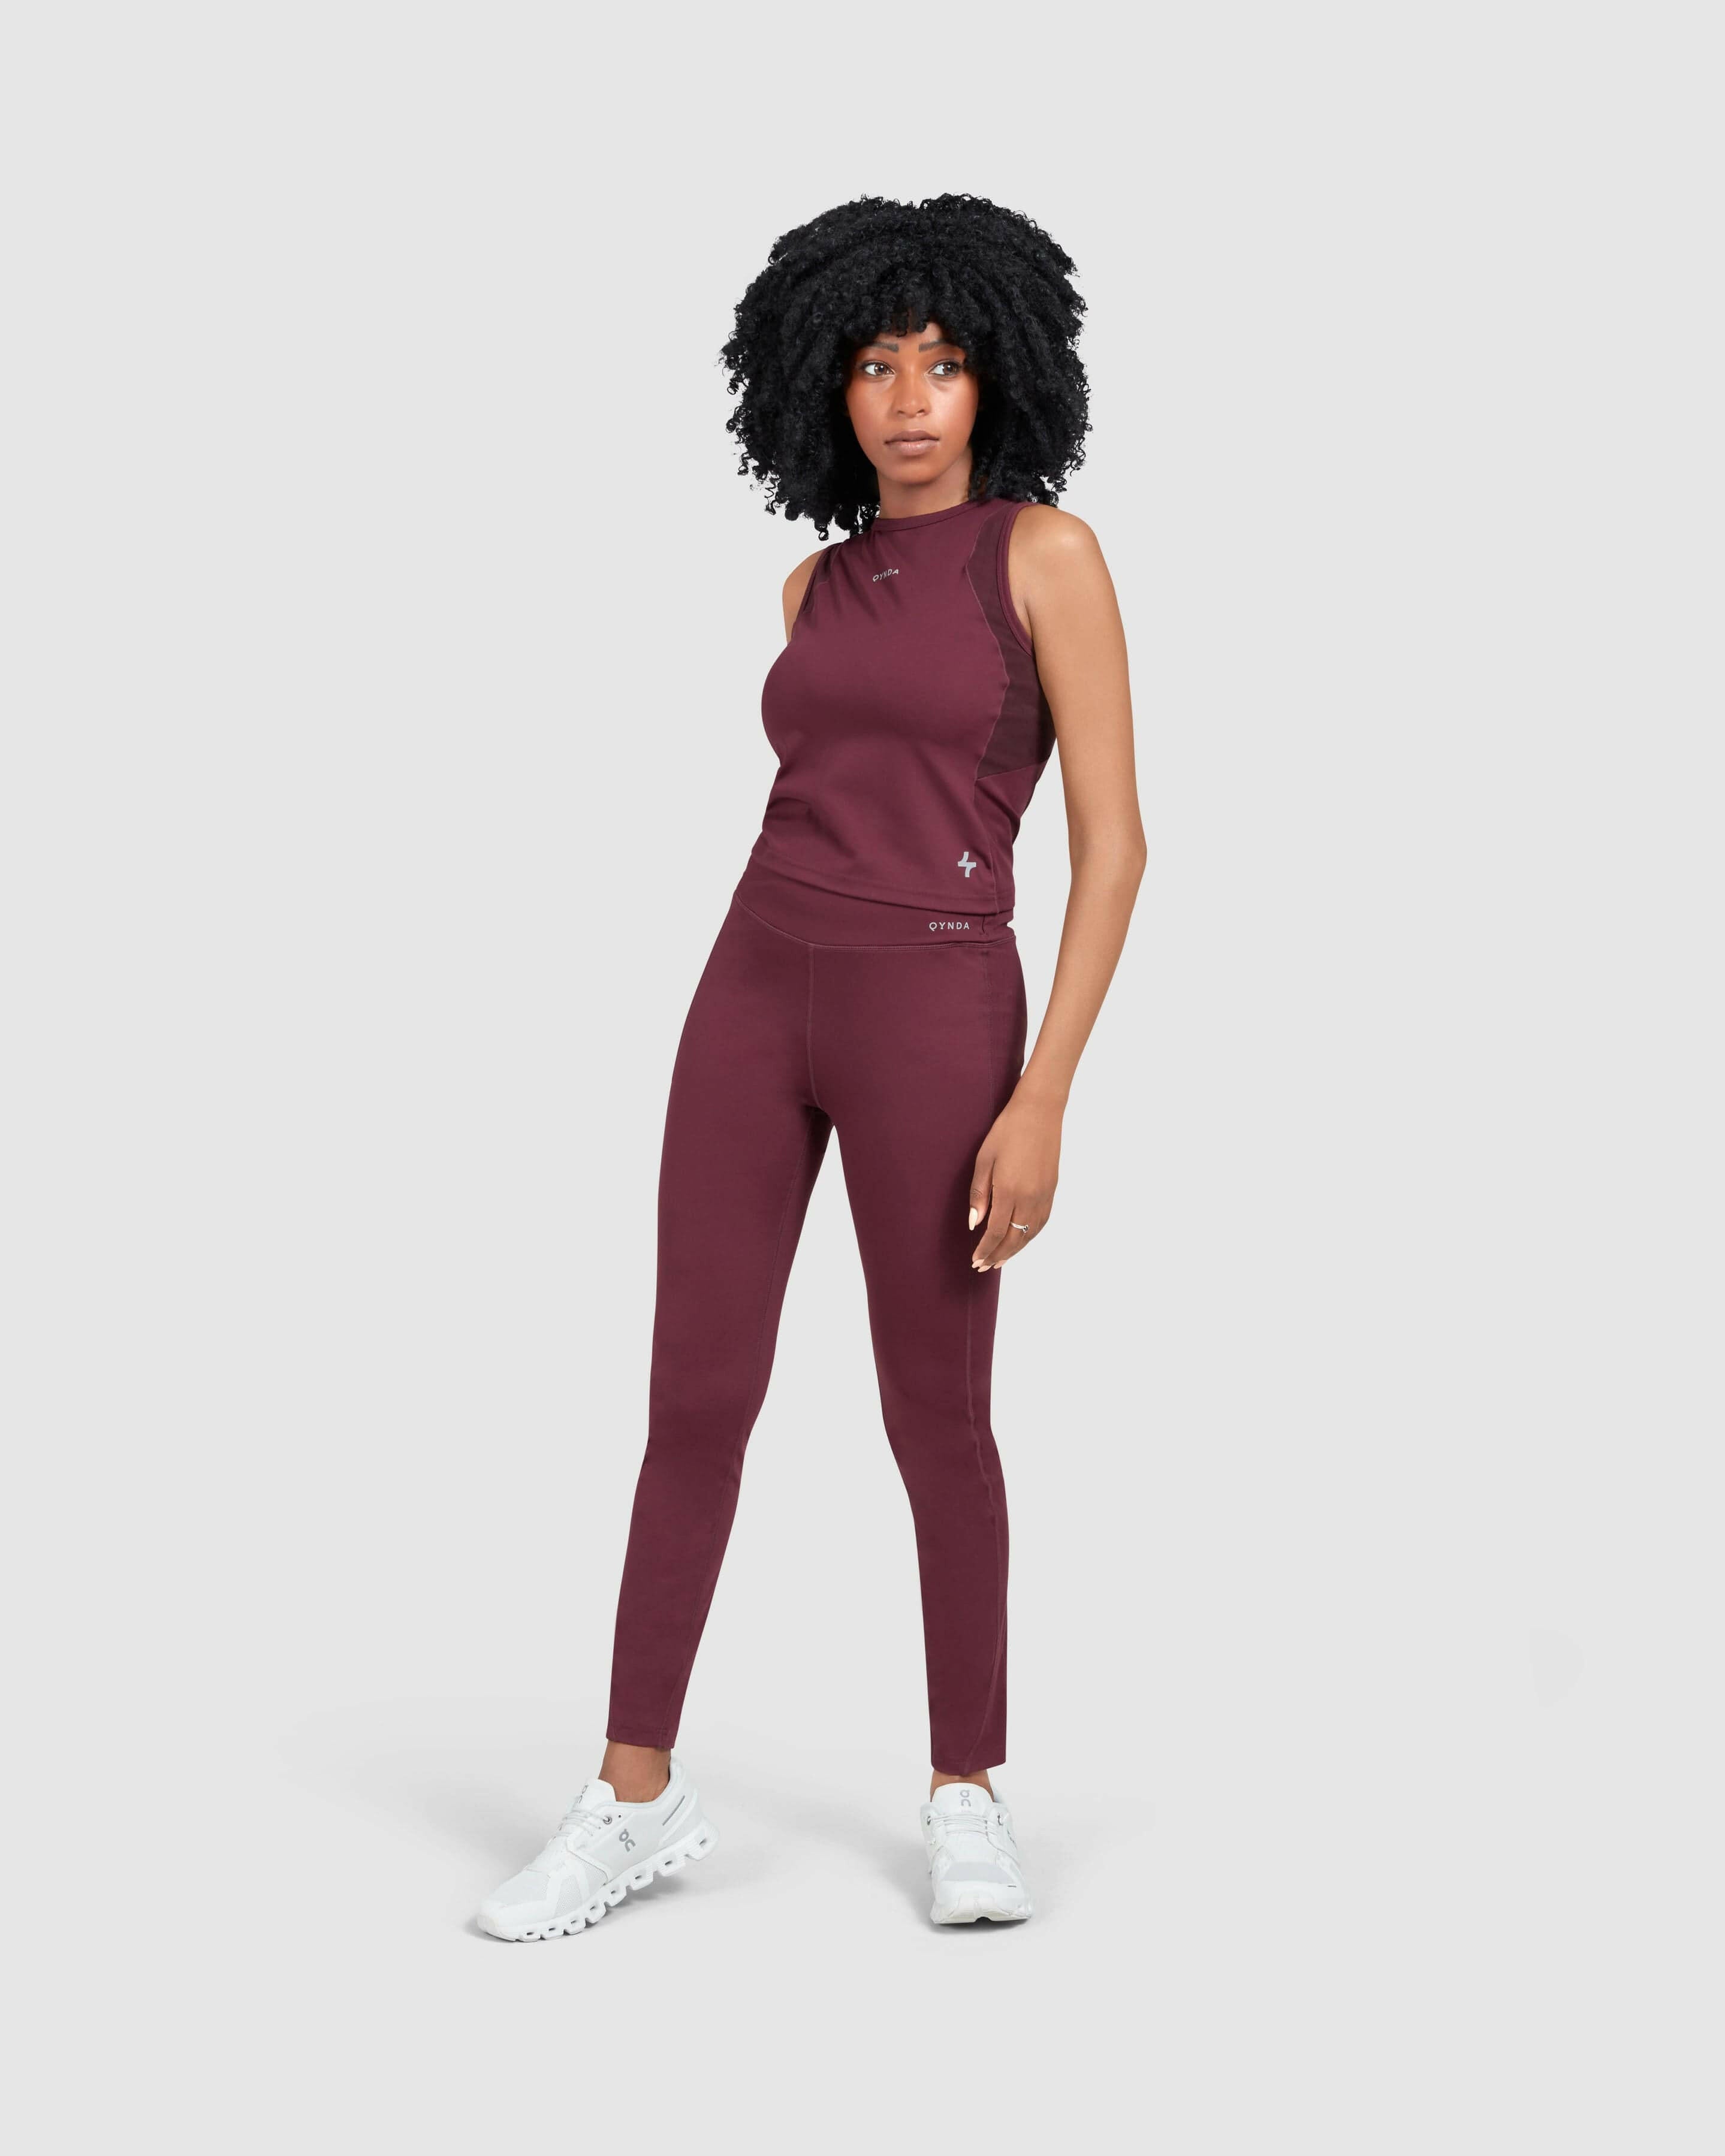 A model stands confidently, modeling a Maroon and matching Modest LADINA LEGGINGS from QYNDA, complemented by white sneakers, against a clean white background.